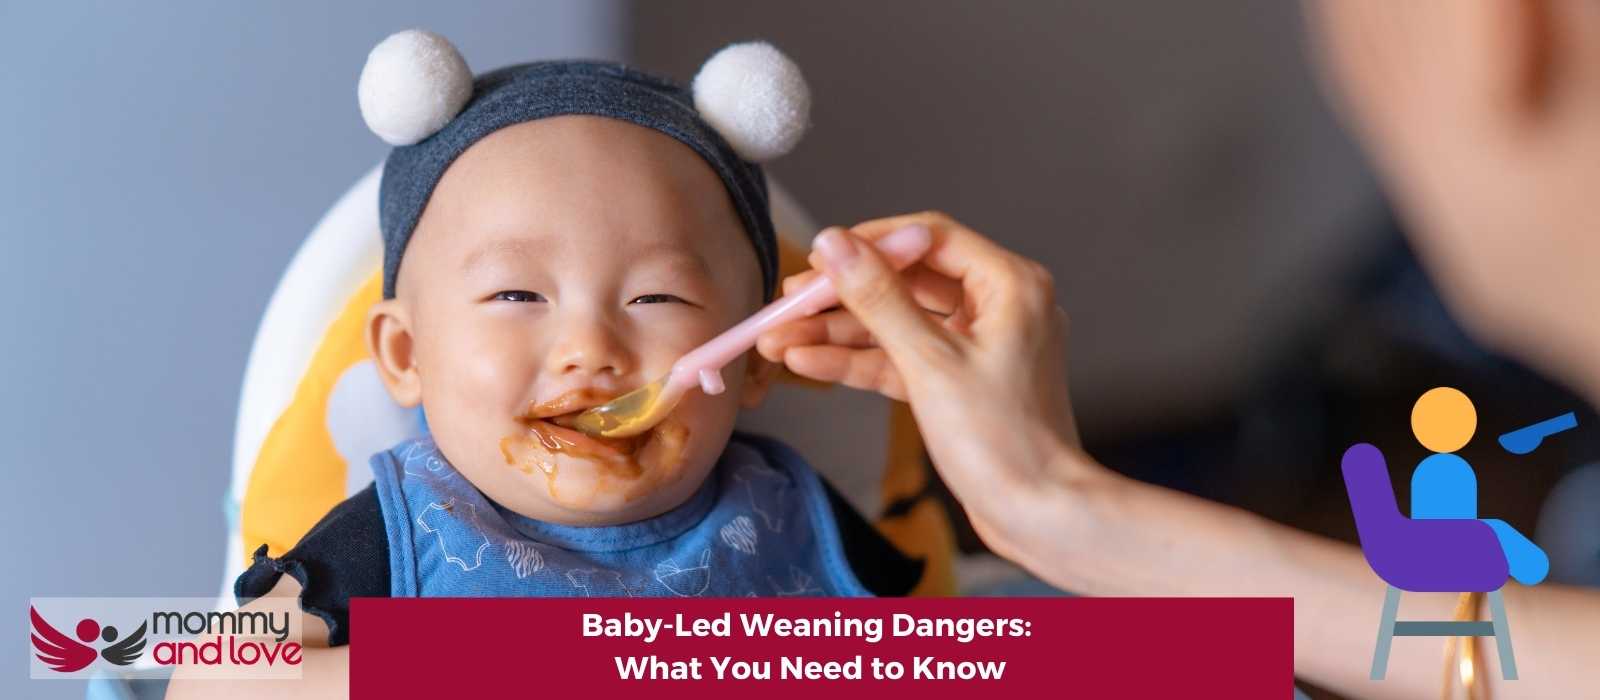 Baby-Led Weaning Dangers: What You Need to Know